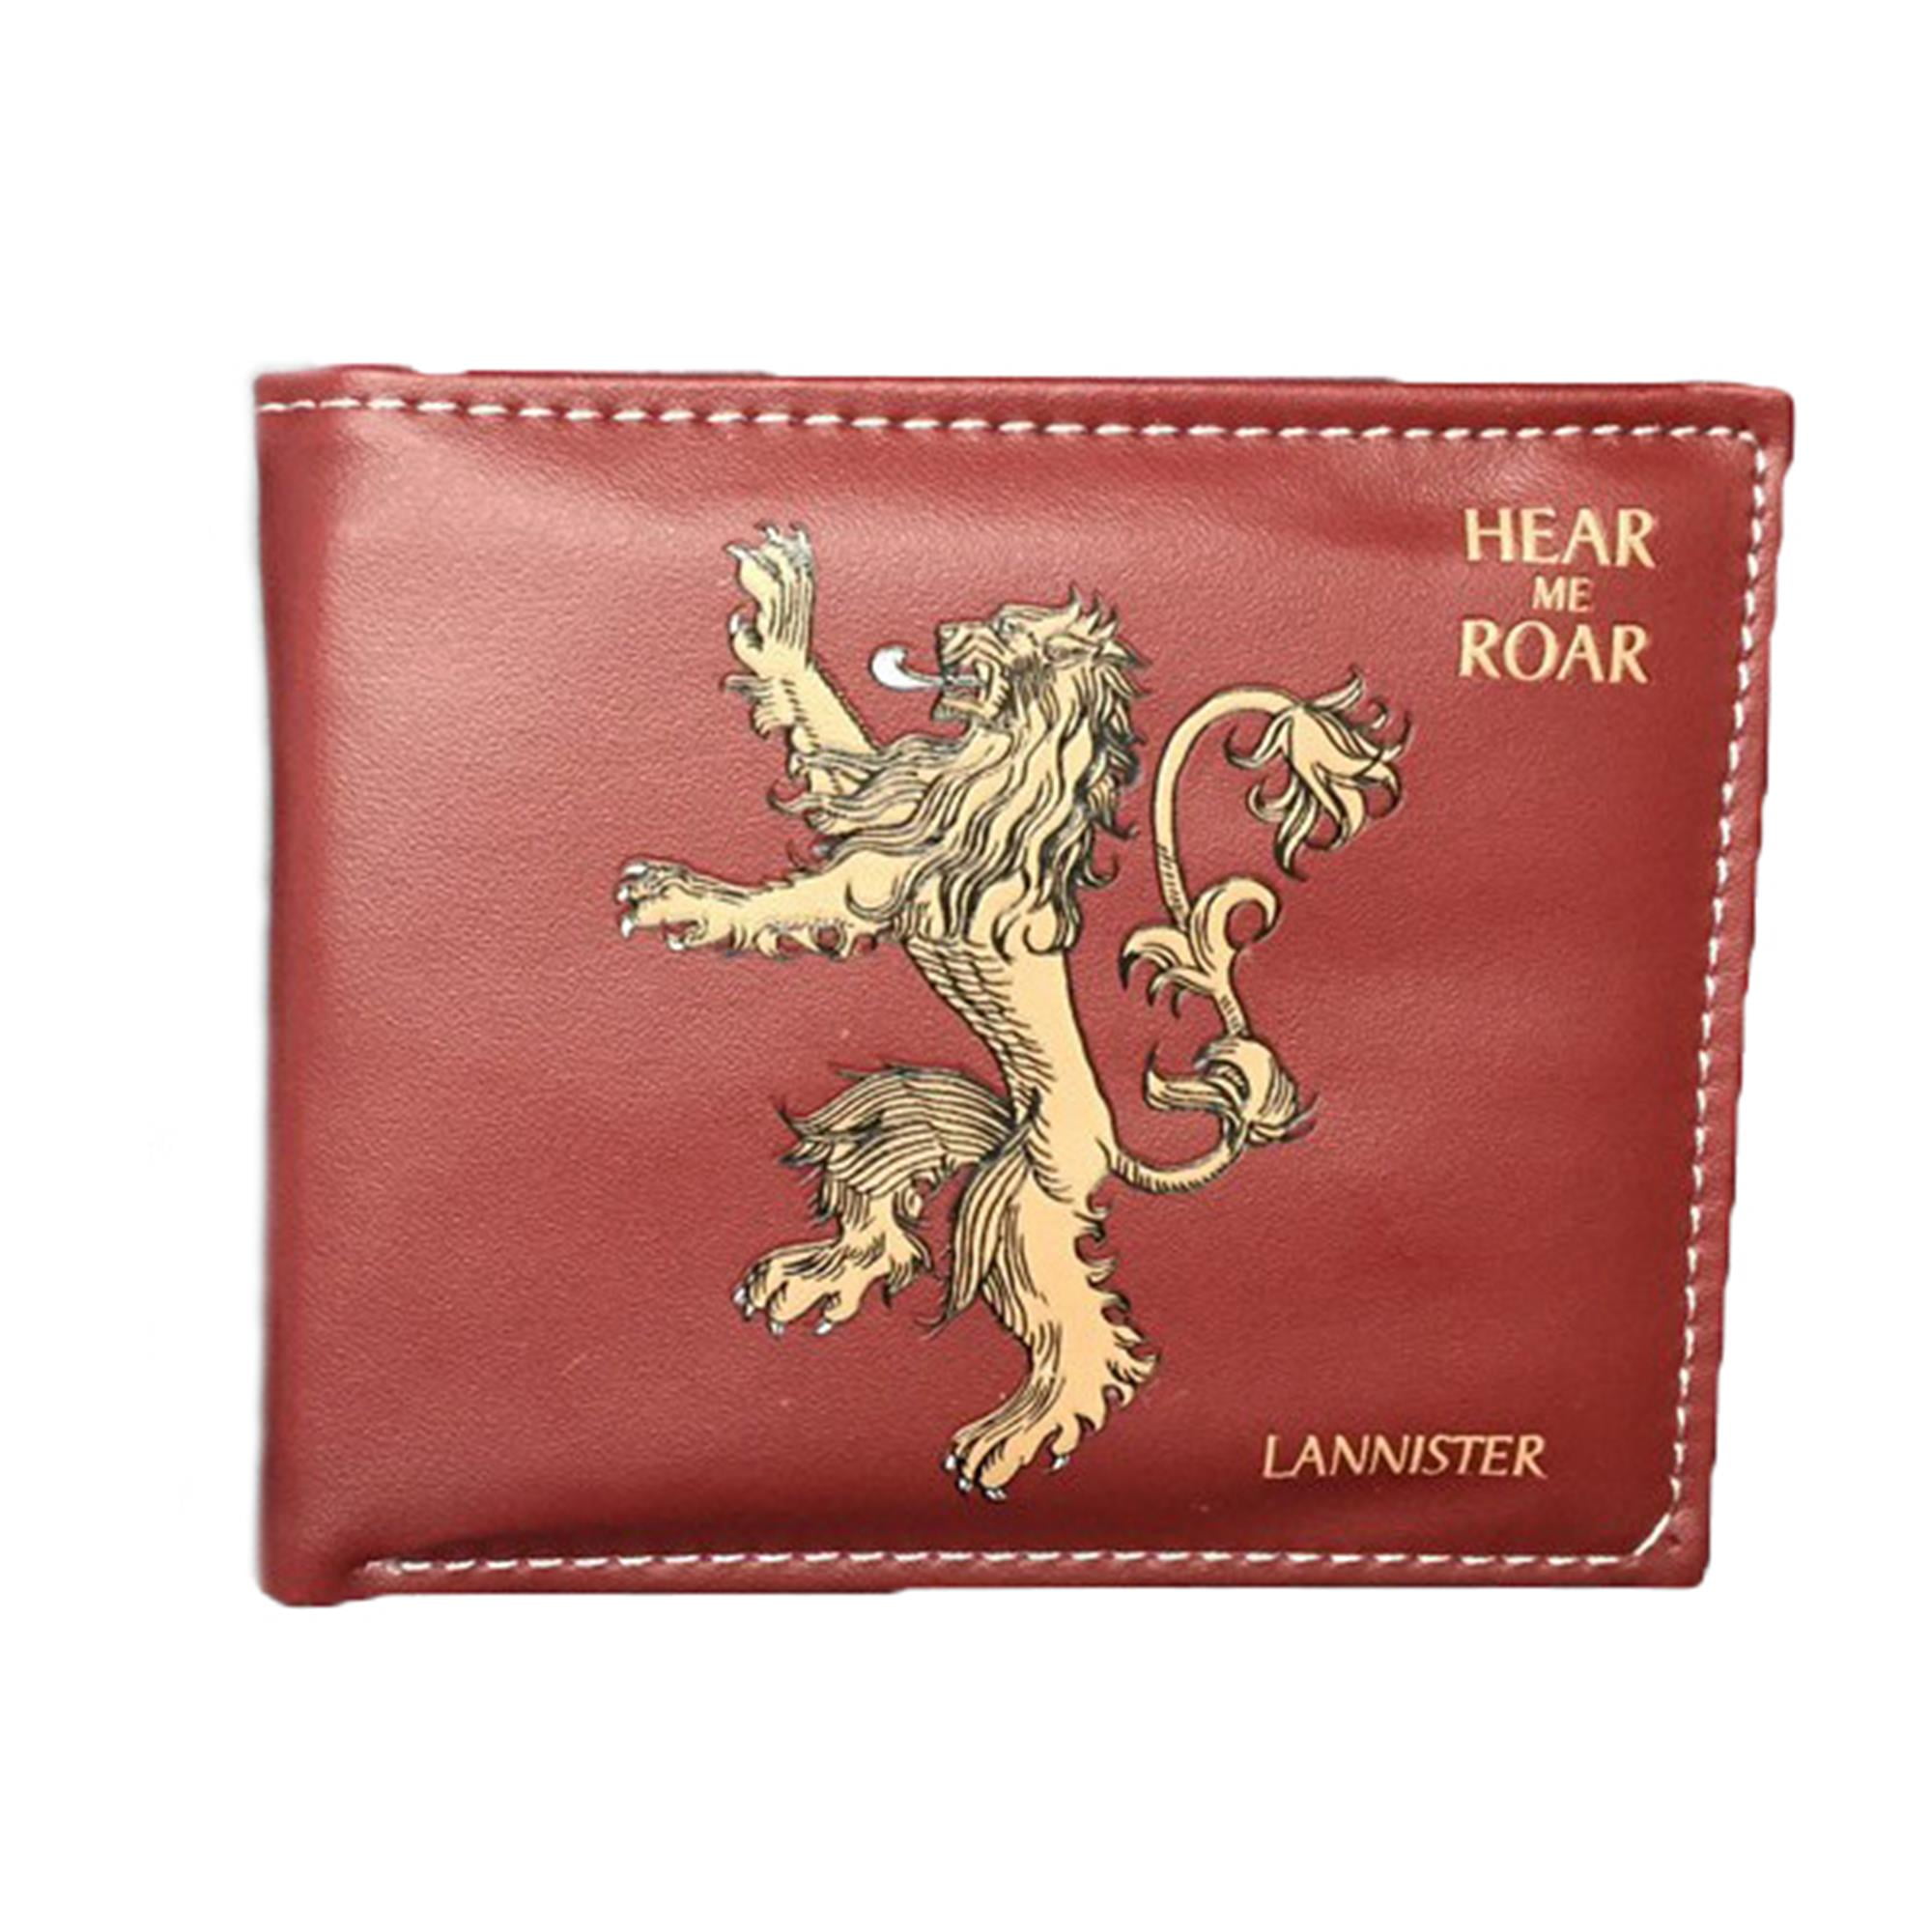 Game of Thrones House Lannister Hear Me Roar Leather Slim Wallet Card Coin Gift 